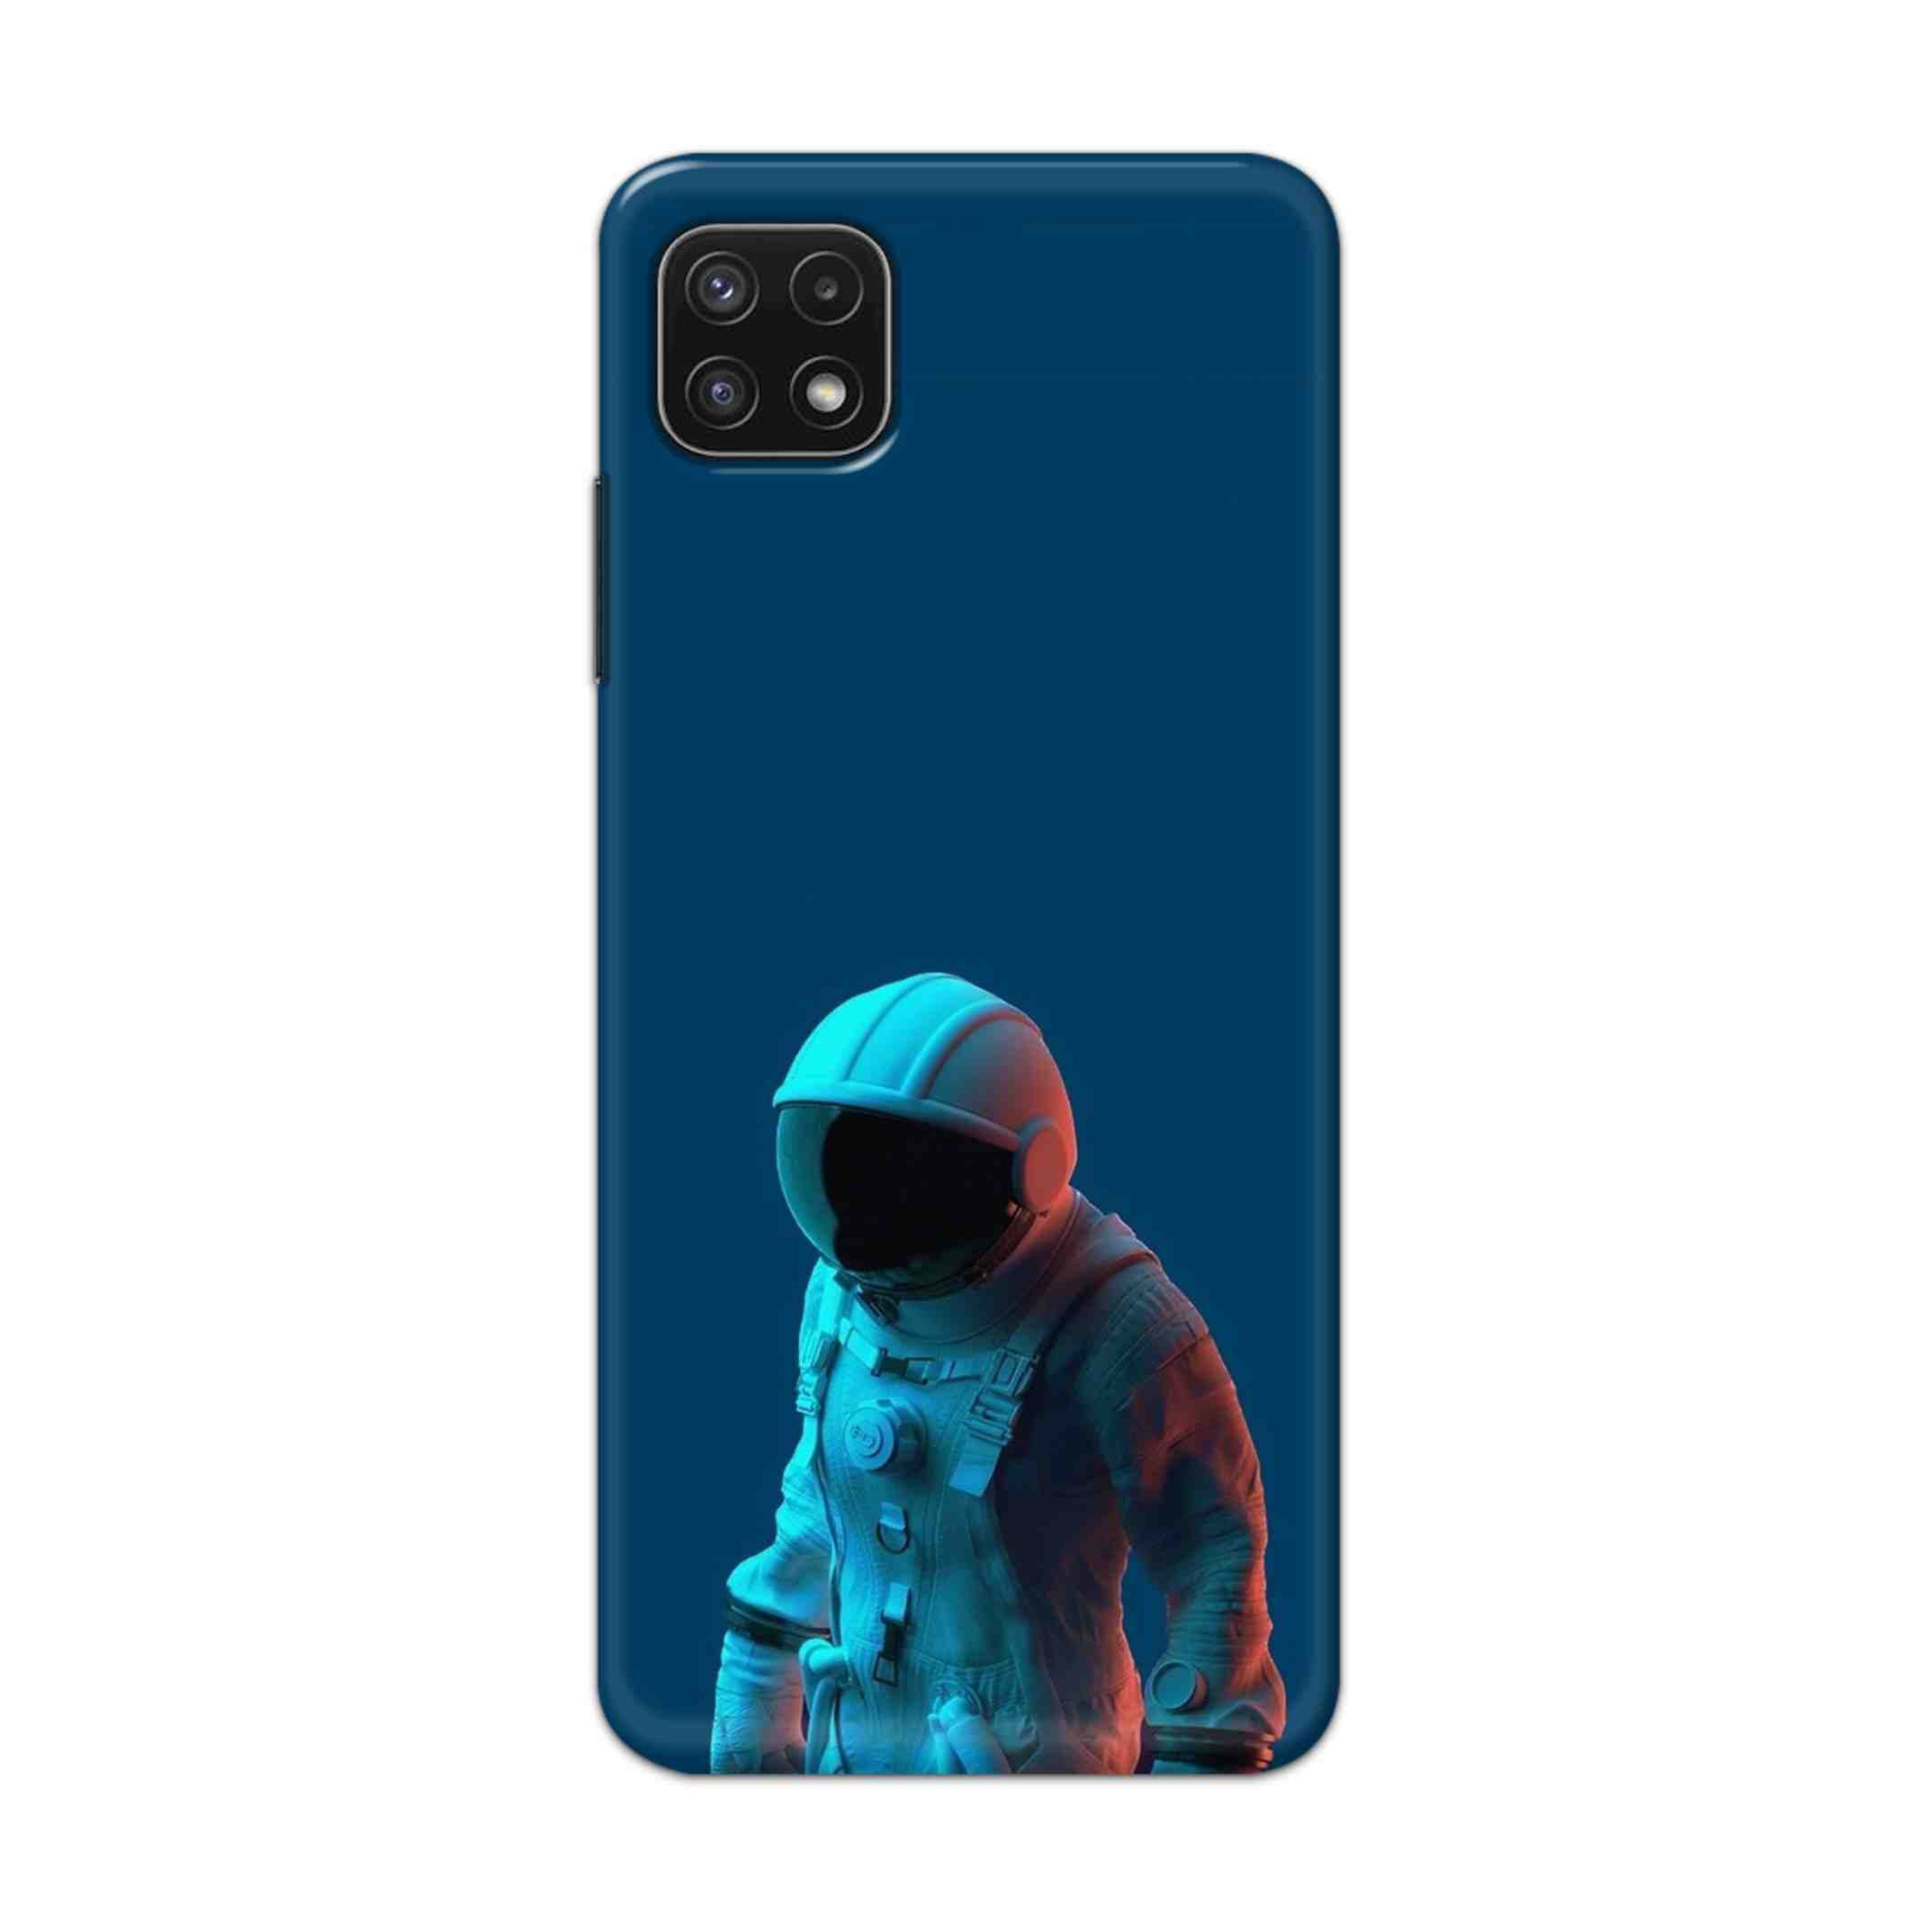 Buy Blue Astronaut Hard Back Mobile Phone Case Cover For Samsung A22 5G Online